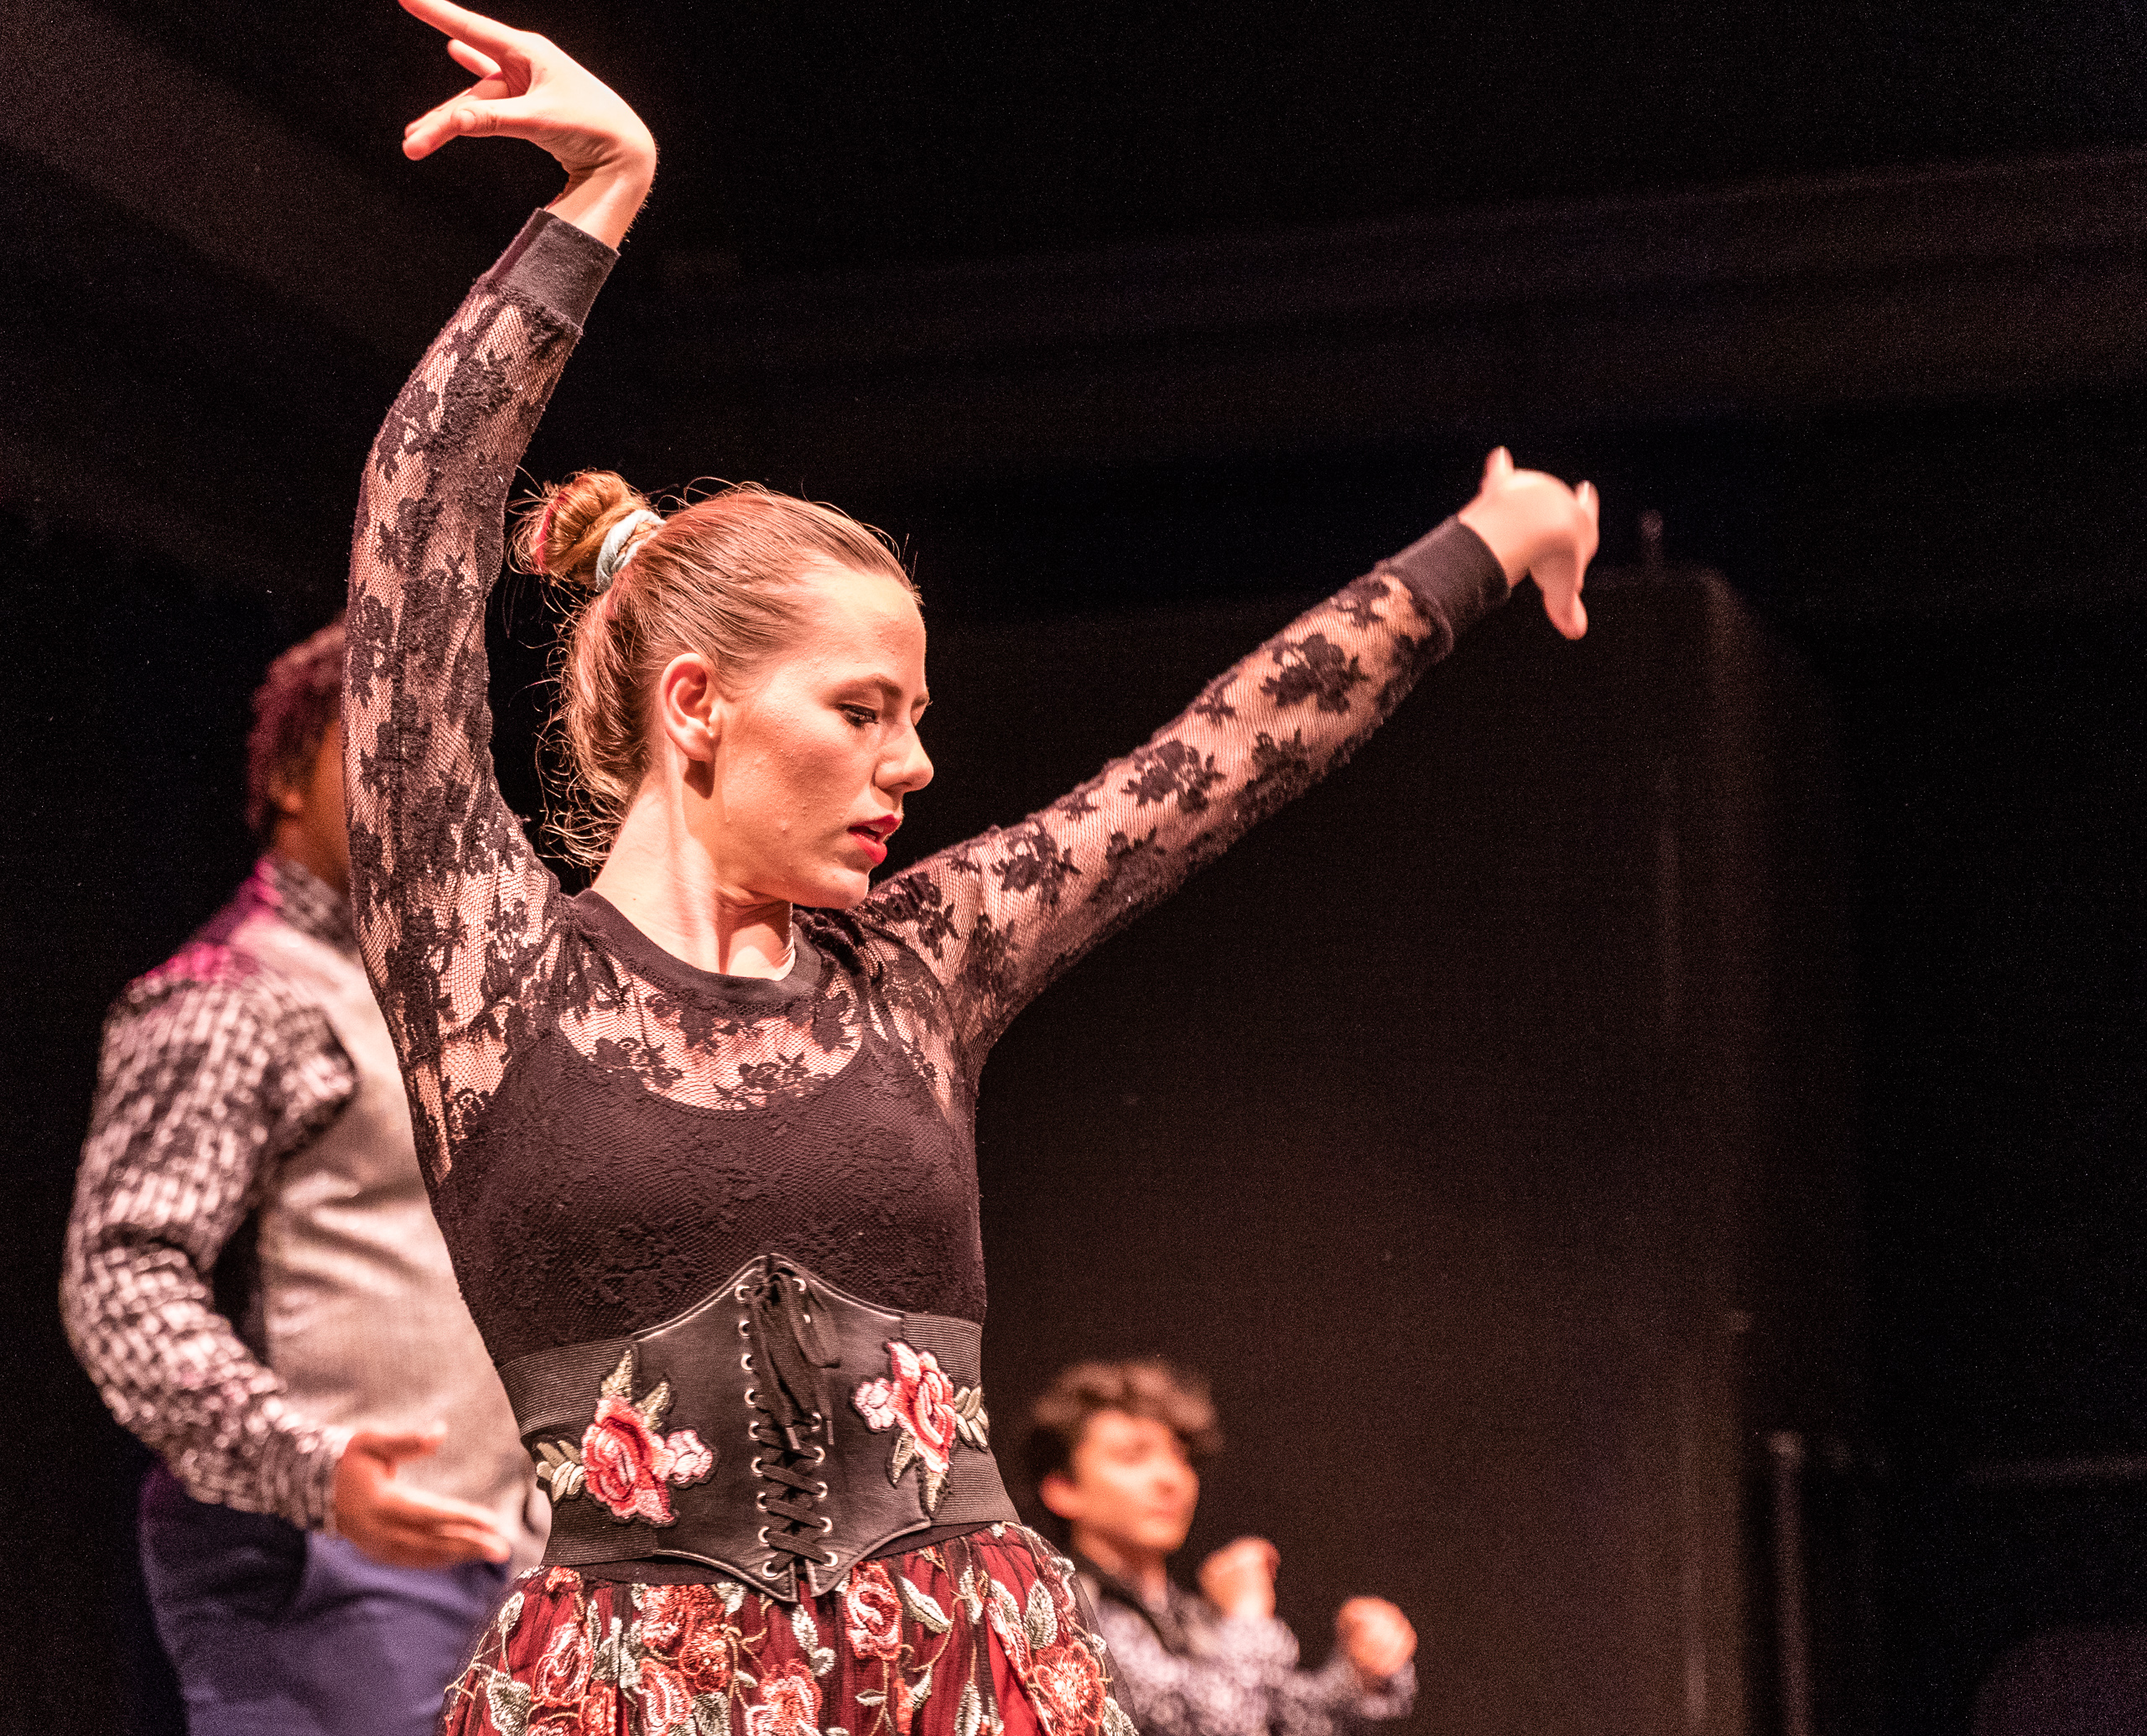 Charlotte Robinson (Lead Singer) Dances Through An Early Scene In The Tech Rehearsal For Flamenco Macbeth On The SMC Studio Stage On Tuesday, April 23, 2019. Flamenco Macbeth Is An Adaptation From Shakespeare By SMC Theatre Arts Department Chair Perviz Sawoski. Performances Are In The SMC Studio Stage On April 26, 27, 28, And May 3, 4, 5. (Glenn Zucman/The Corsair)